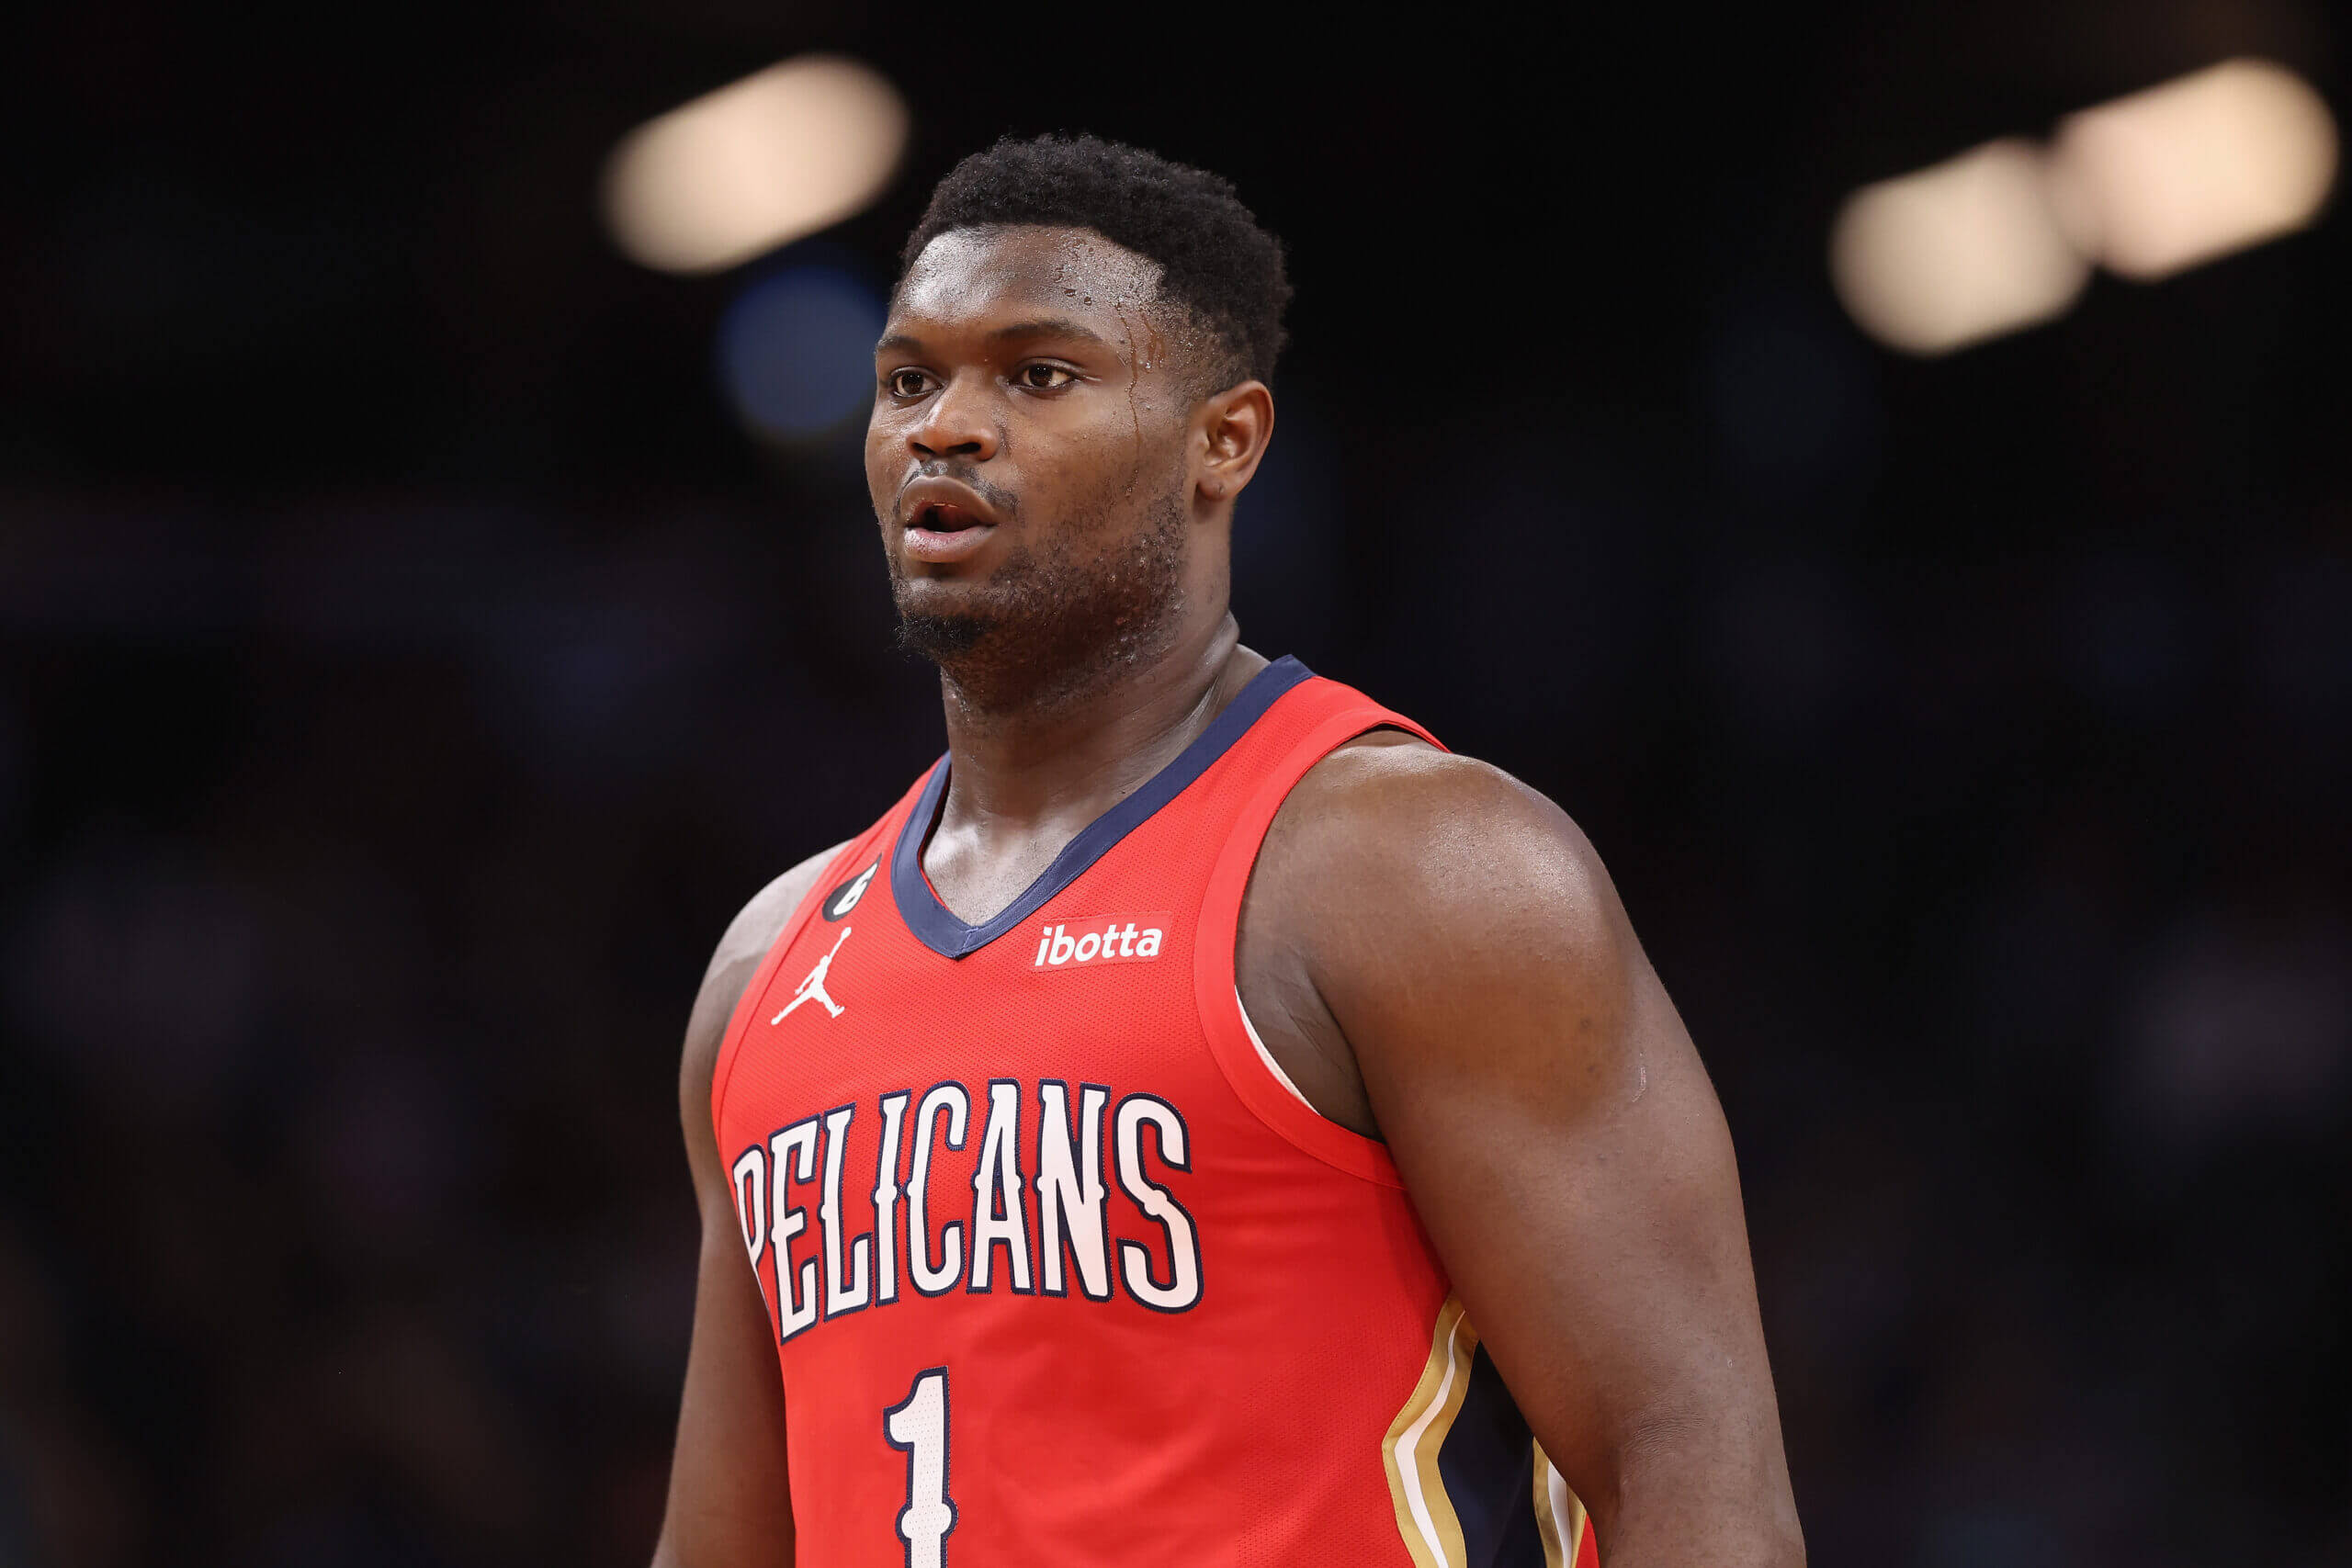 Zion Williamson's Comeback Journey: Overcoming Injuries and Contract Hurdles for NBA Stardom